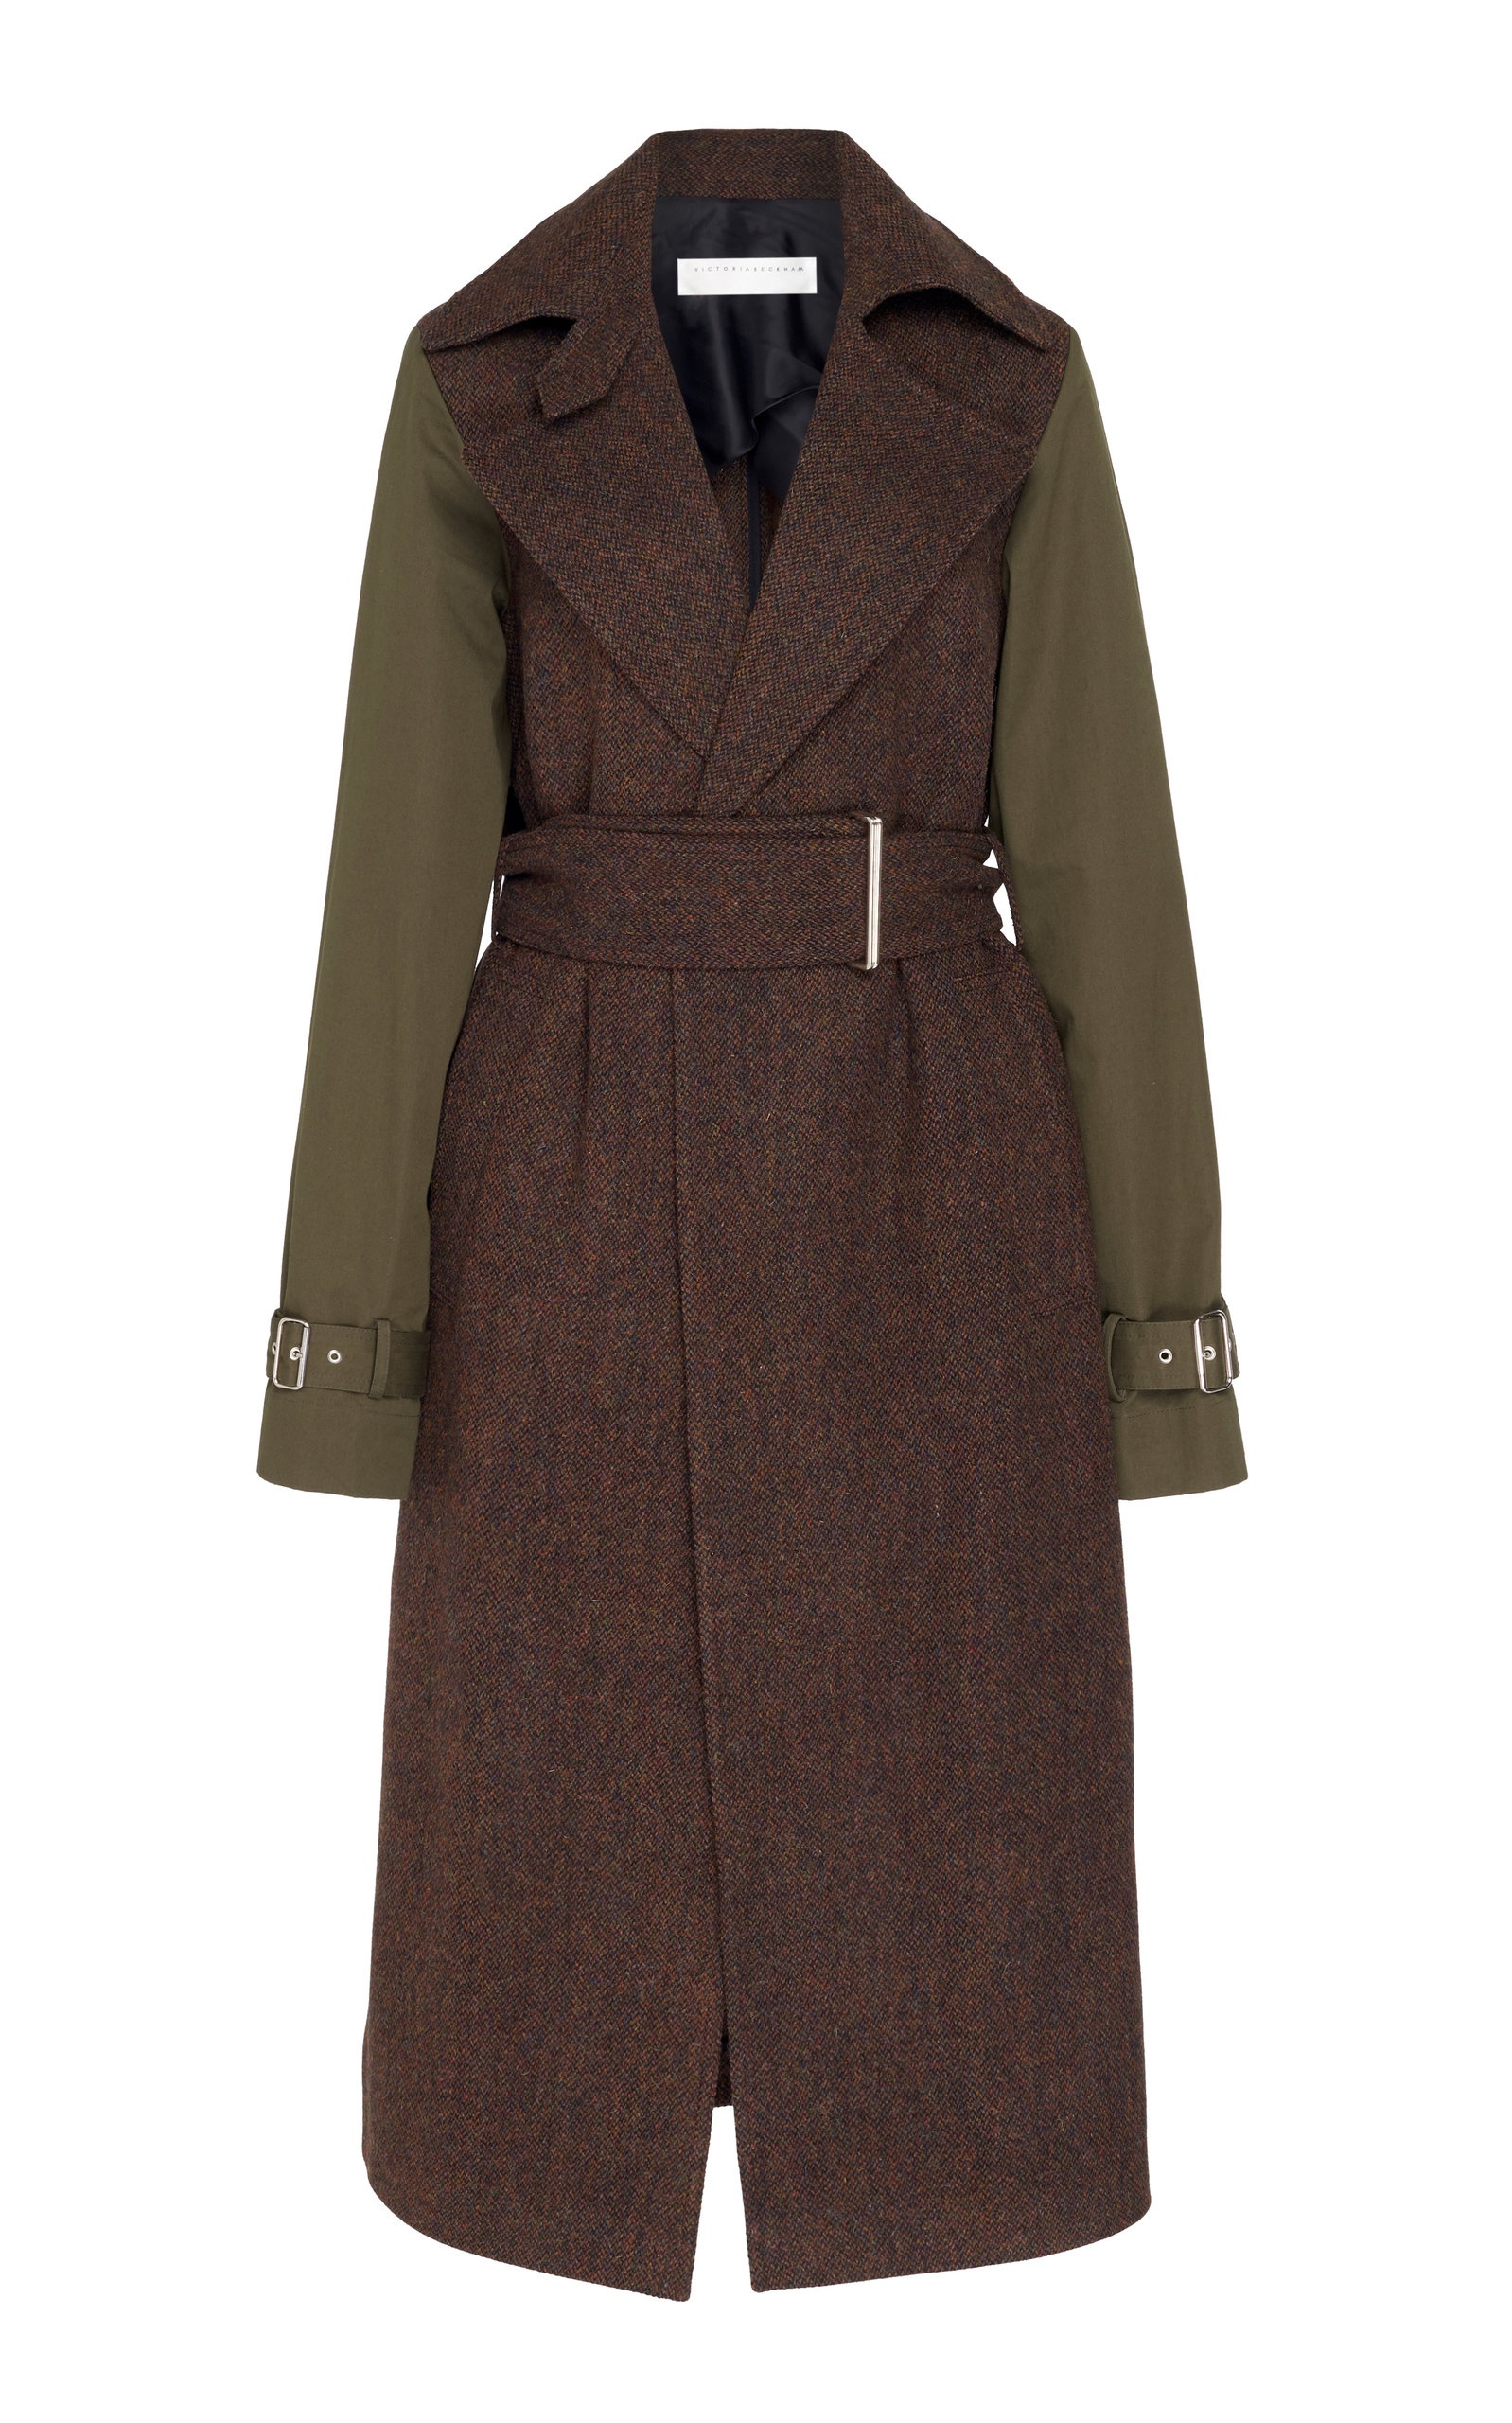 Contrast Sleeve Fitted Wool Trench Coat by Victoria | Moda Operandi